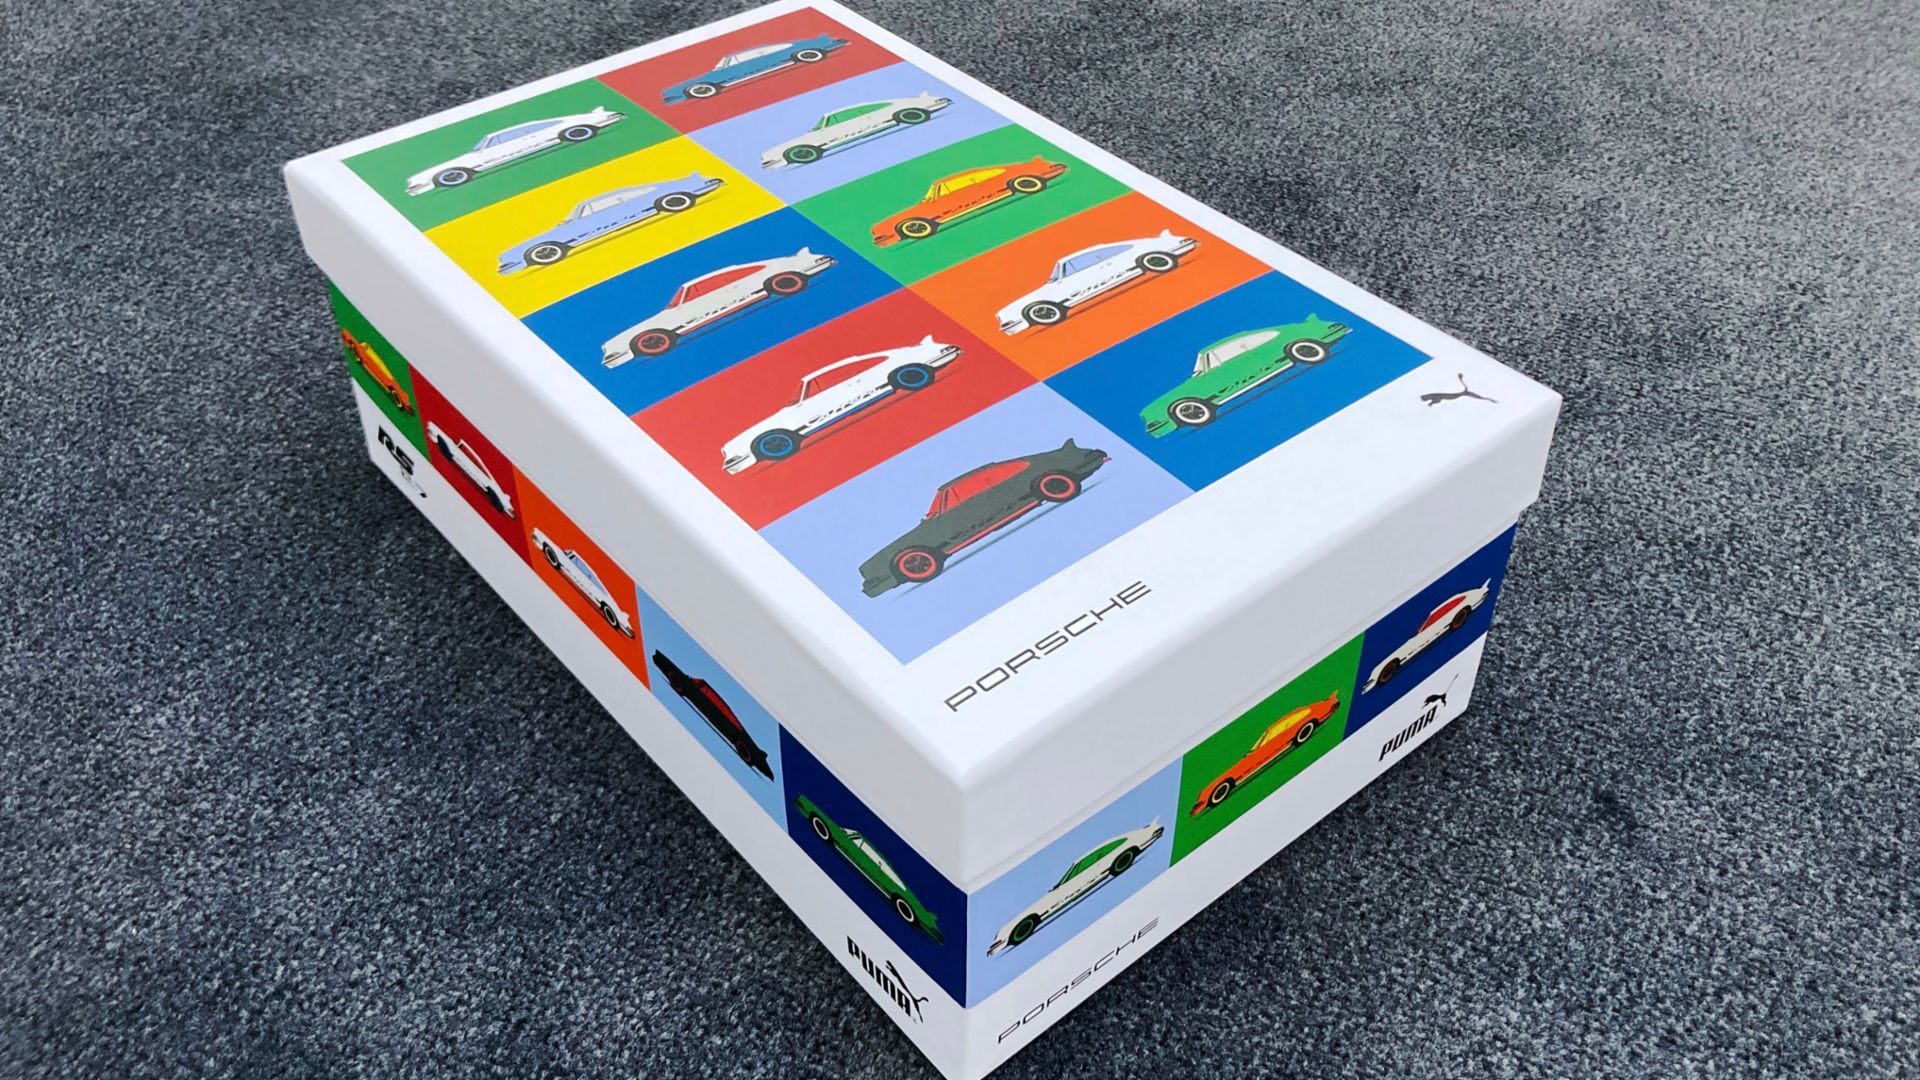 Shoe box provided with the Porsche x Puma Carrera RS 2.7 shoes